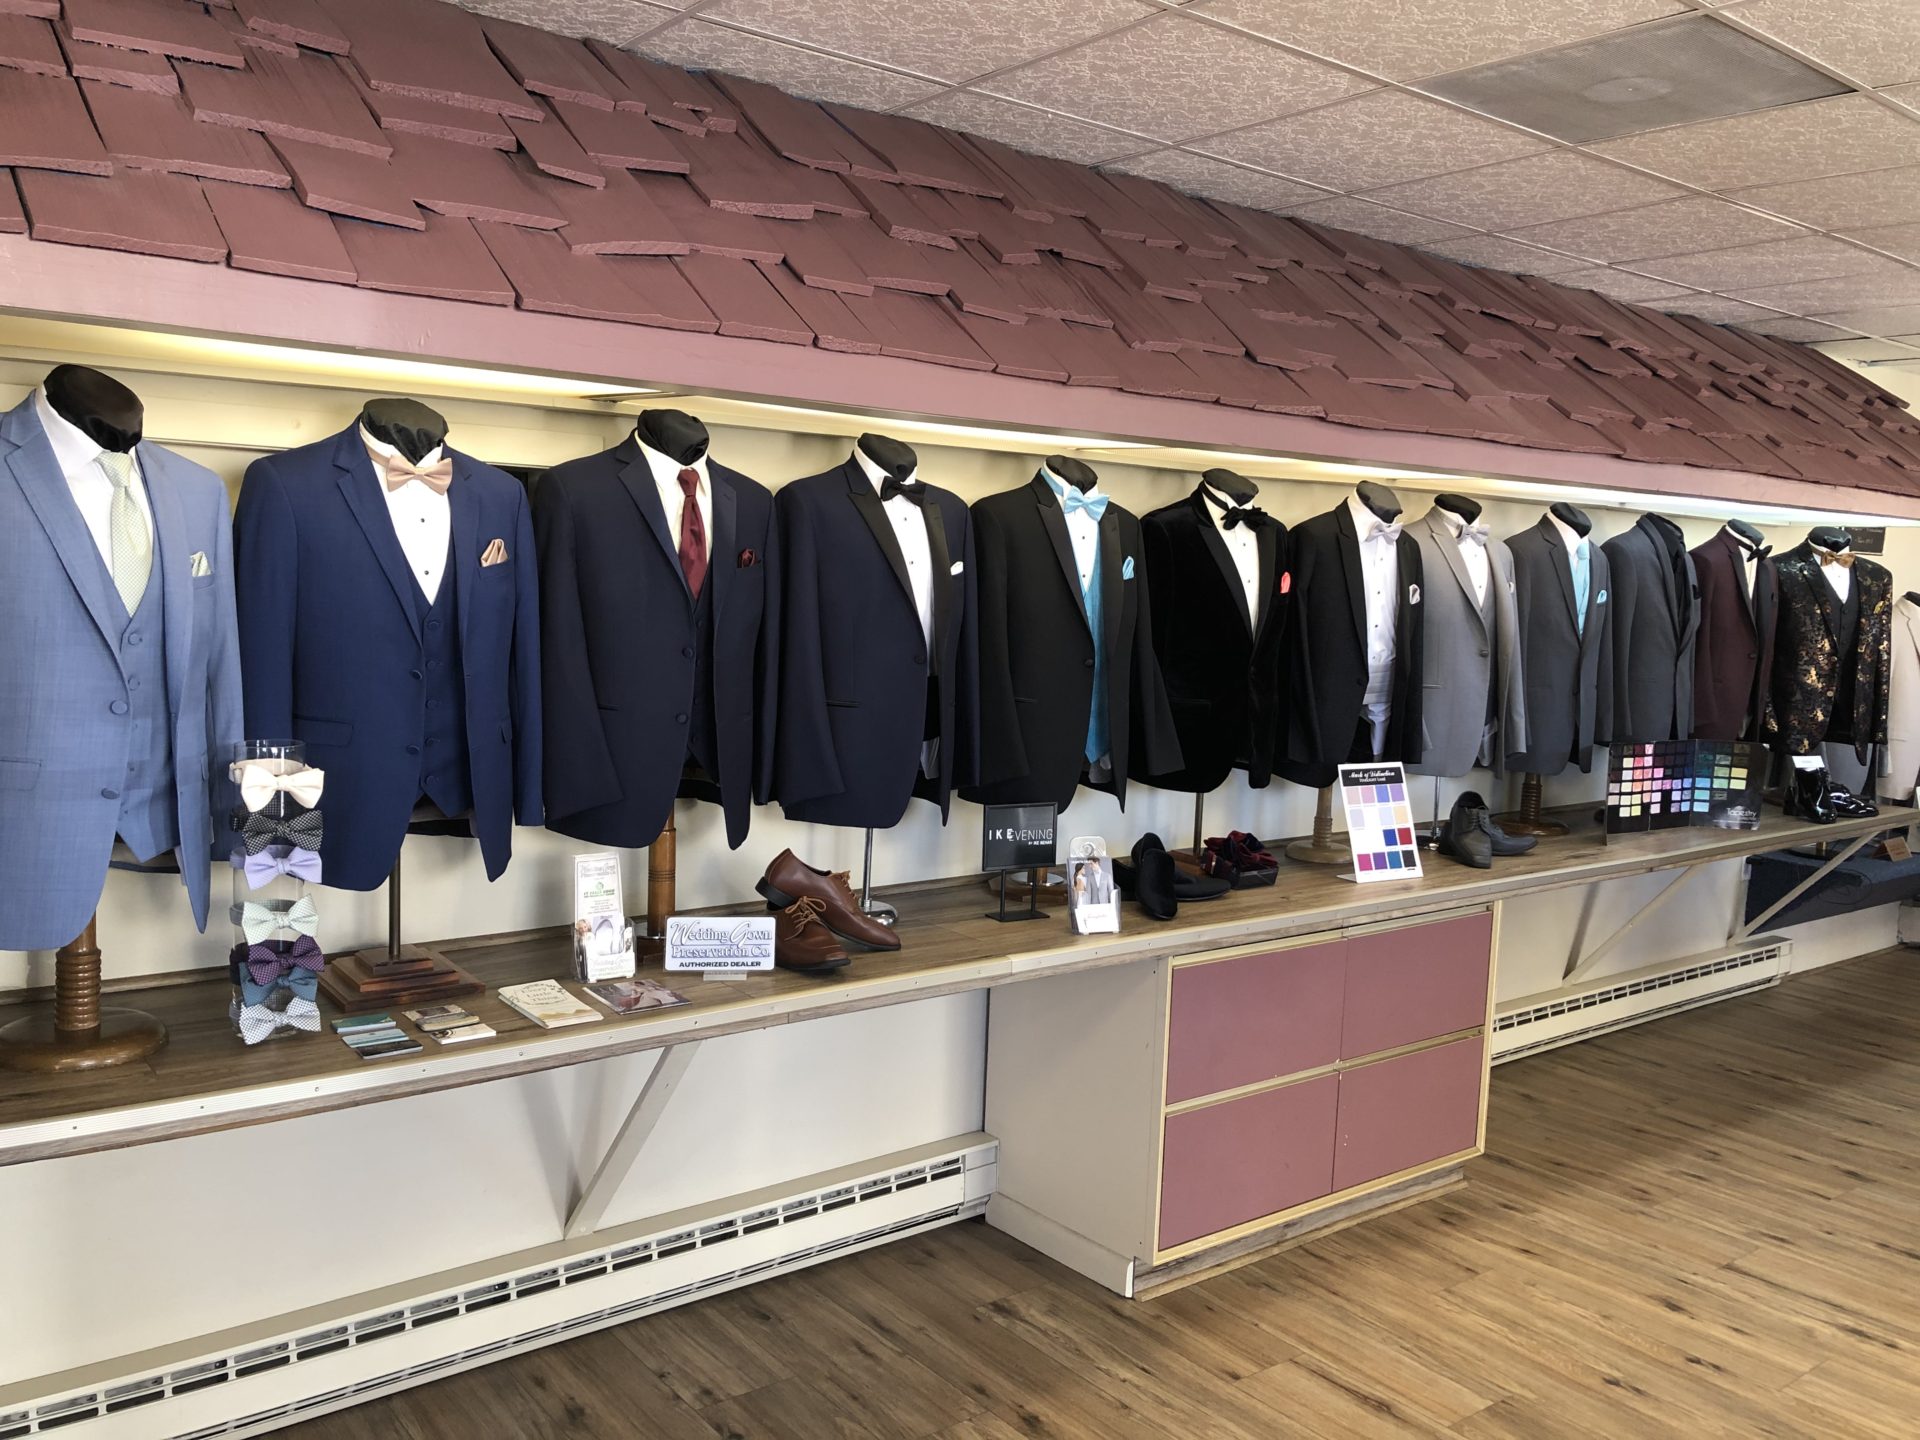 A row of suits hanging on the wall.